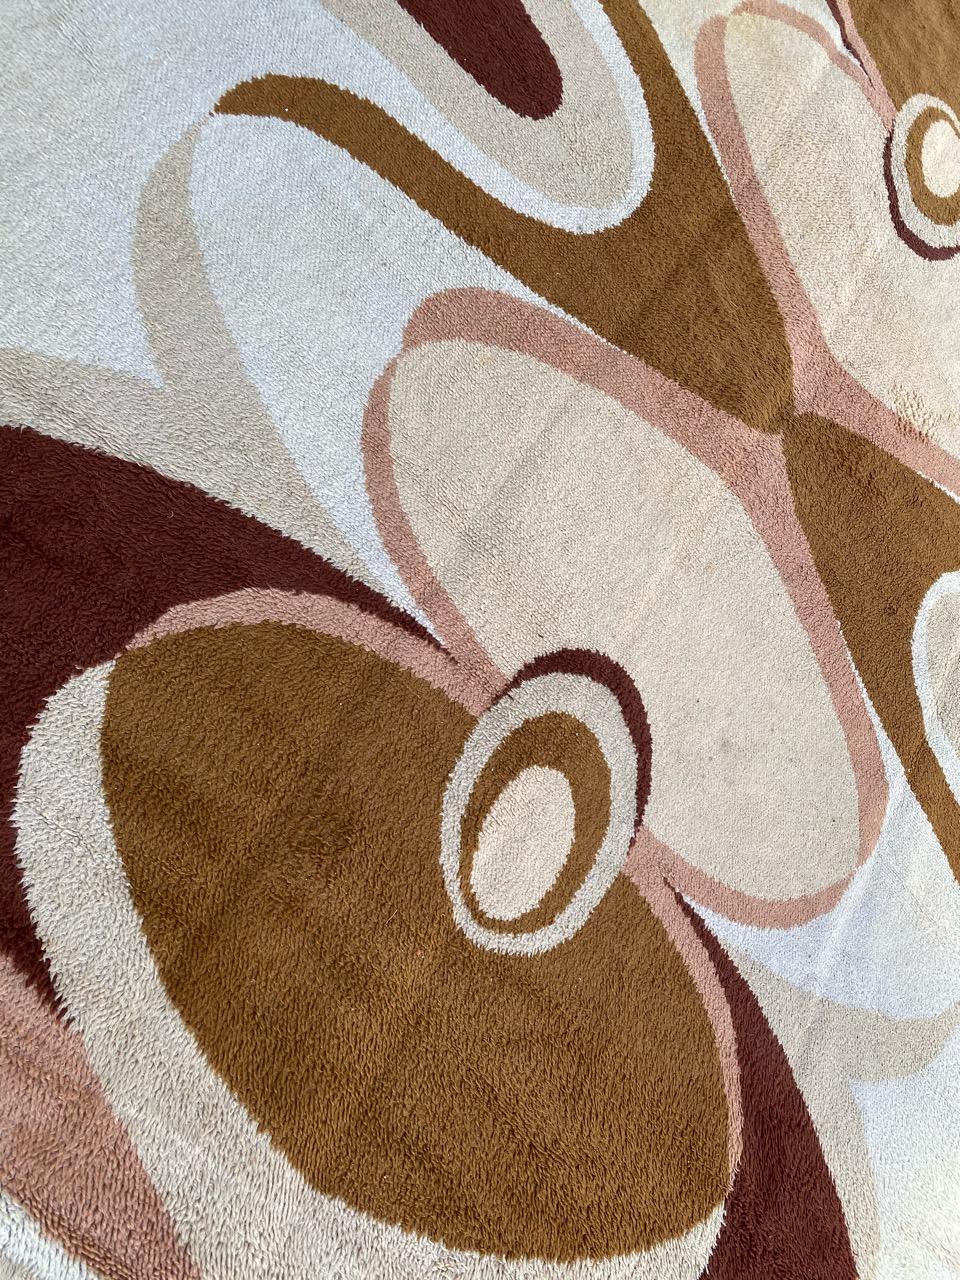 Very beautiful vintage 70’s, 60’s Desso rug, with beautiful Art Deco design and light colors, wool velvet on cotton and jute foundation.